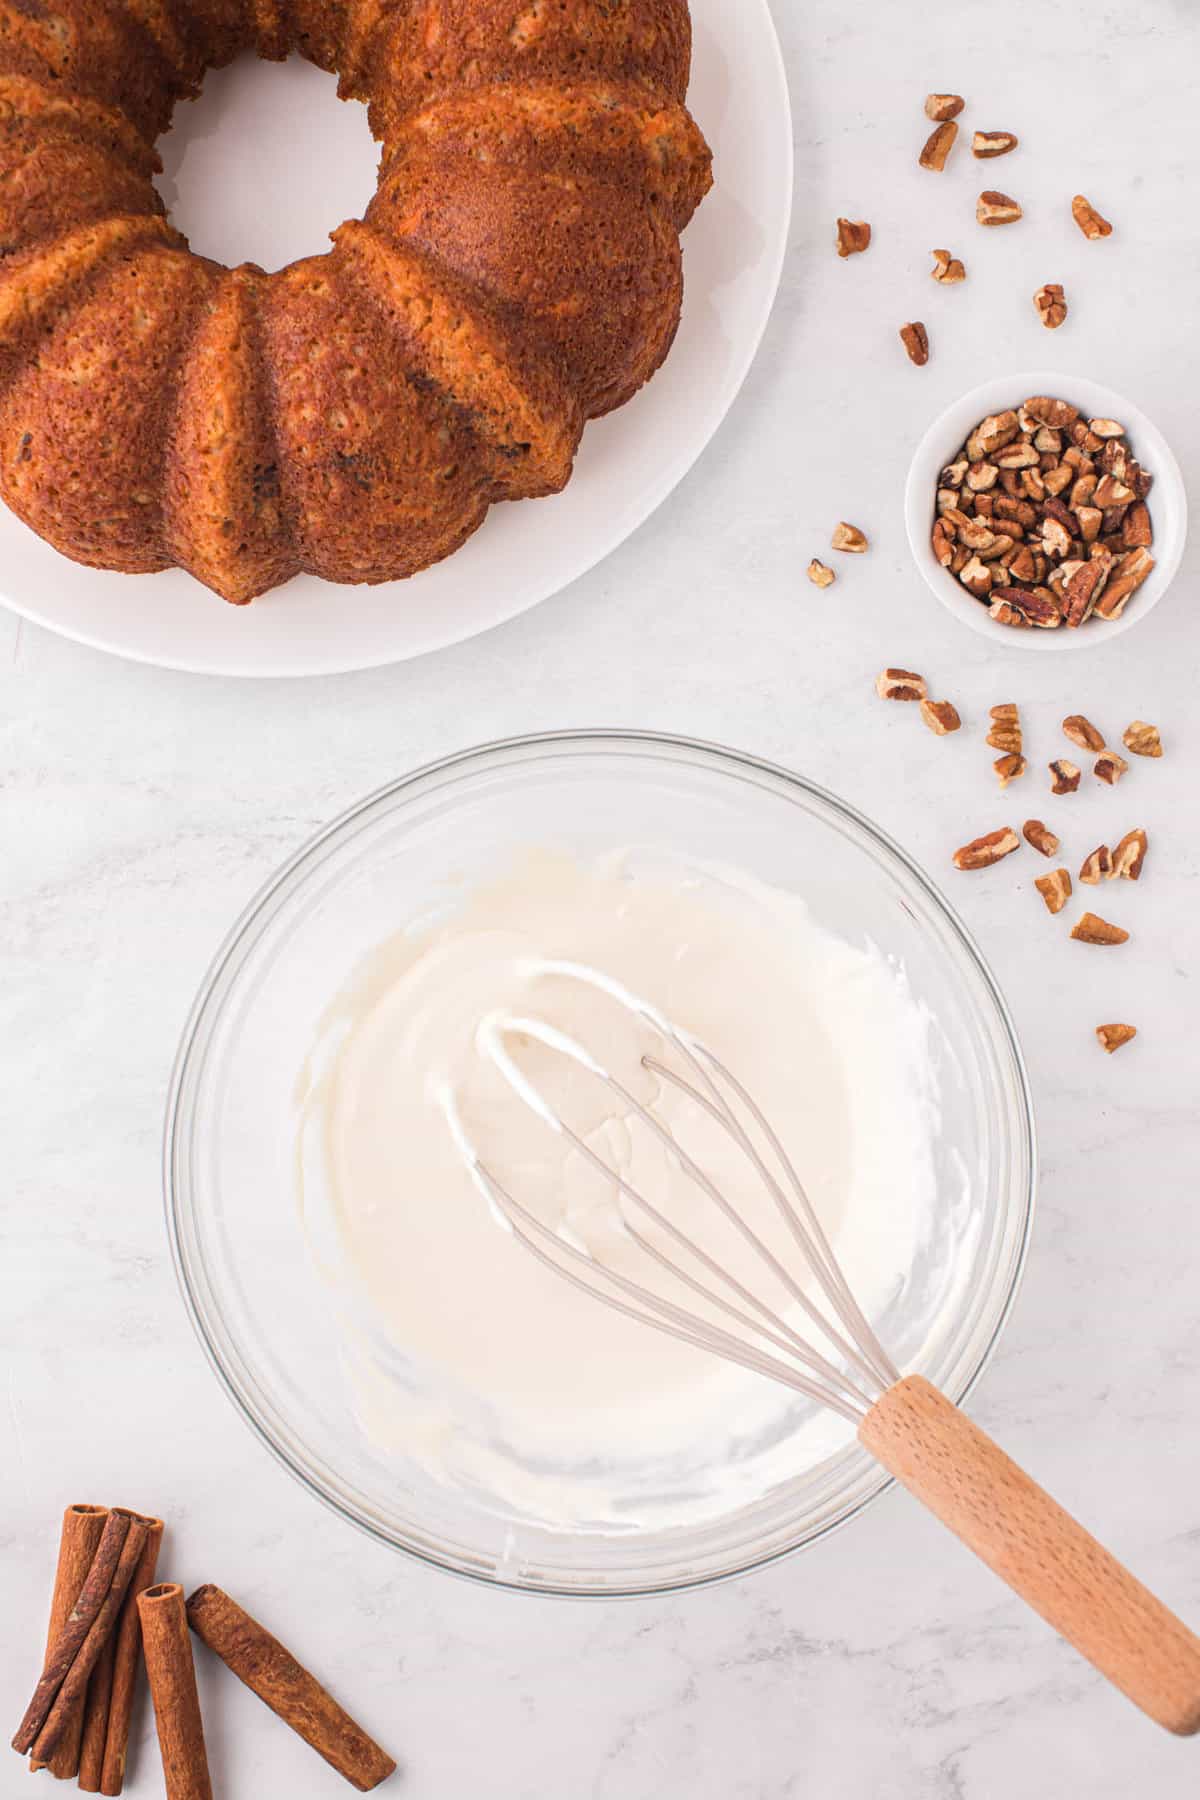 Whisking Together Heavy Cream and Prepared Cream Cheese Frosting for Carrot Bundt Cake Reipe